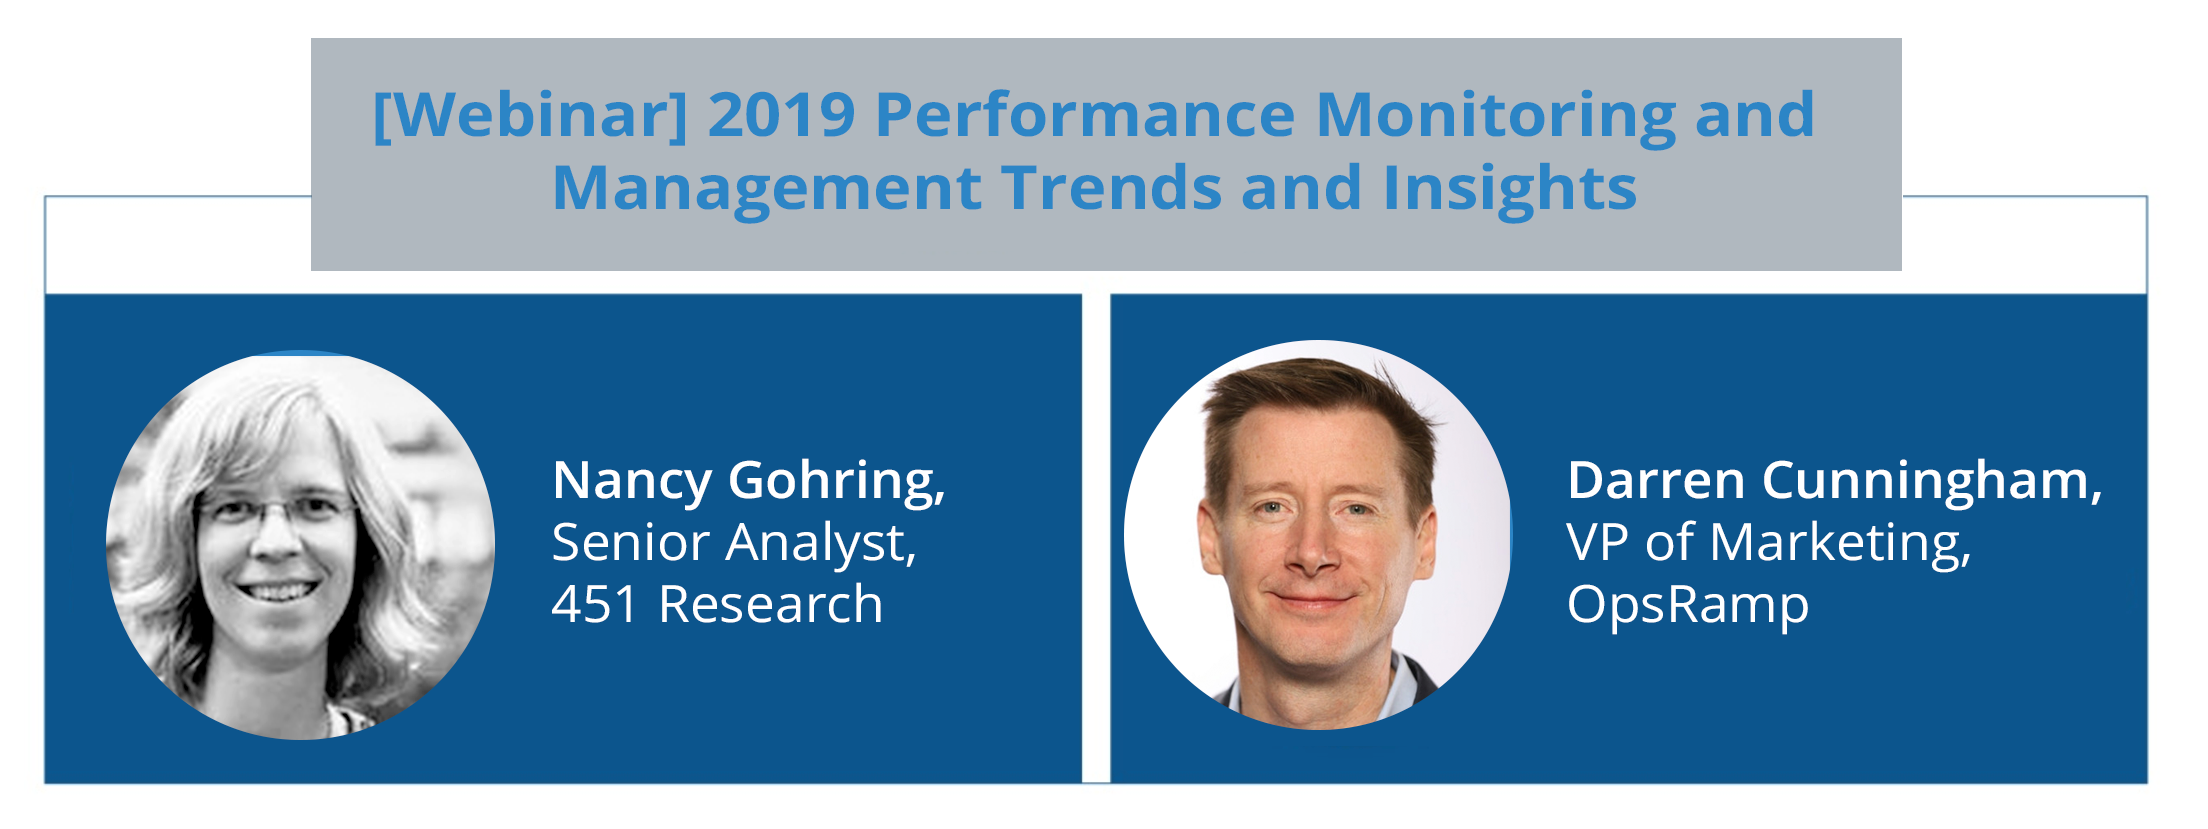 451 Research Webinar on Performance Monitoring